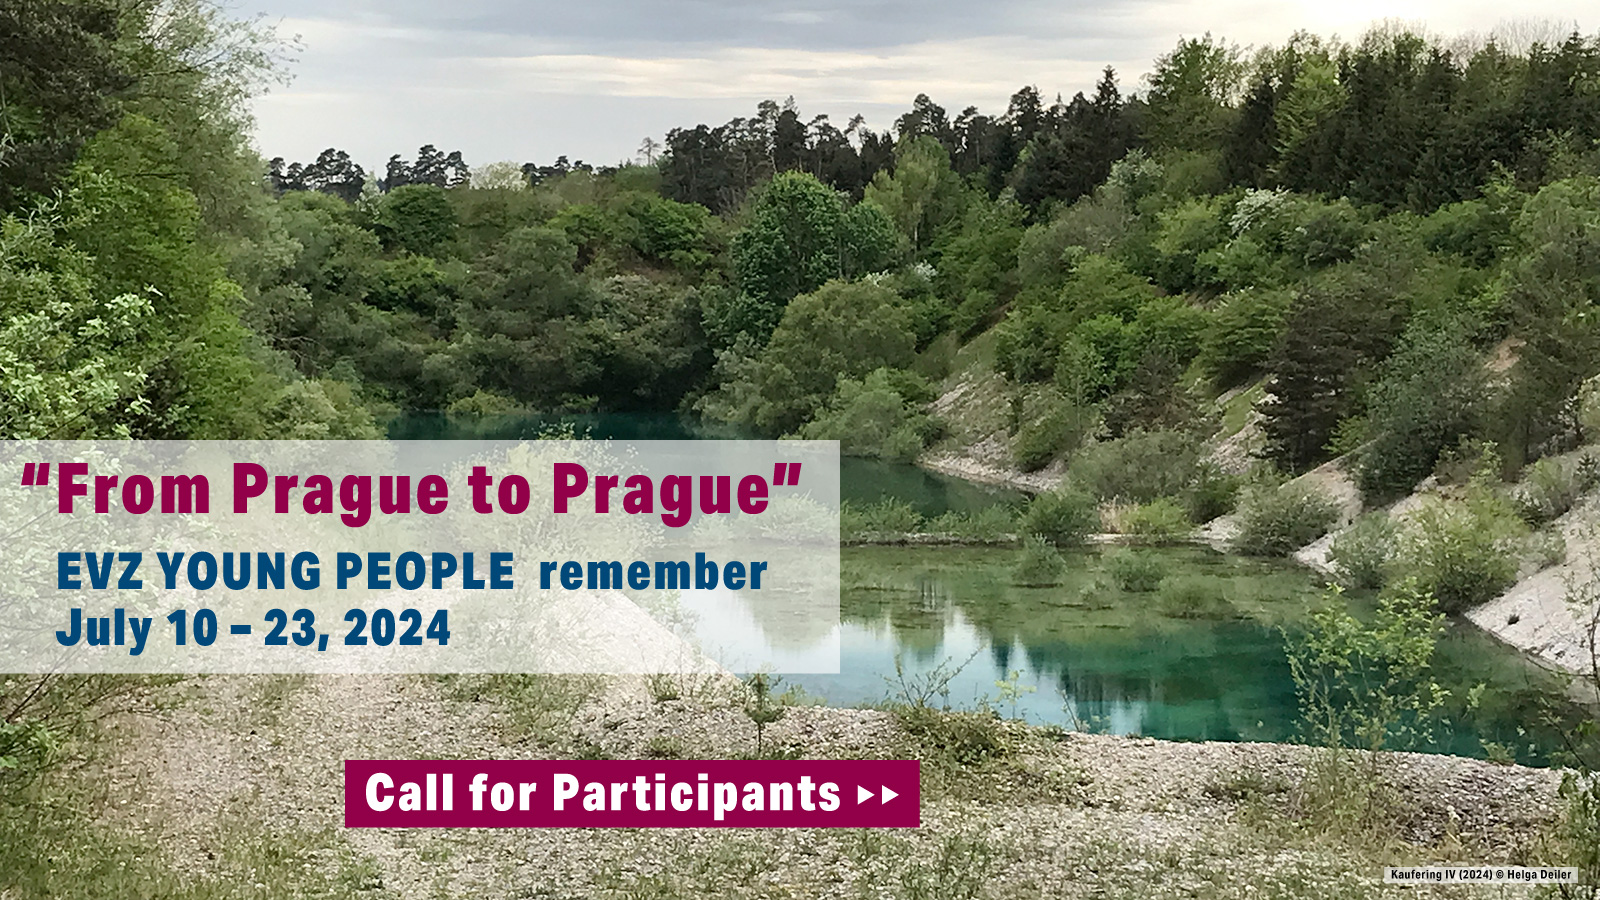 Call for Participants: "From Prague to Prague"